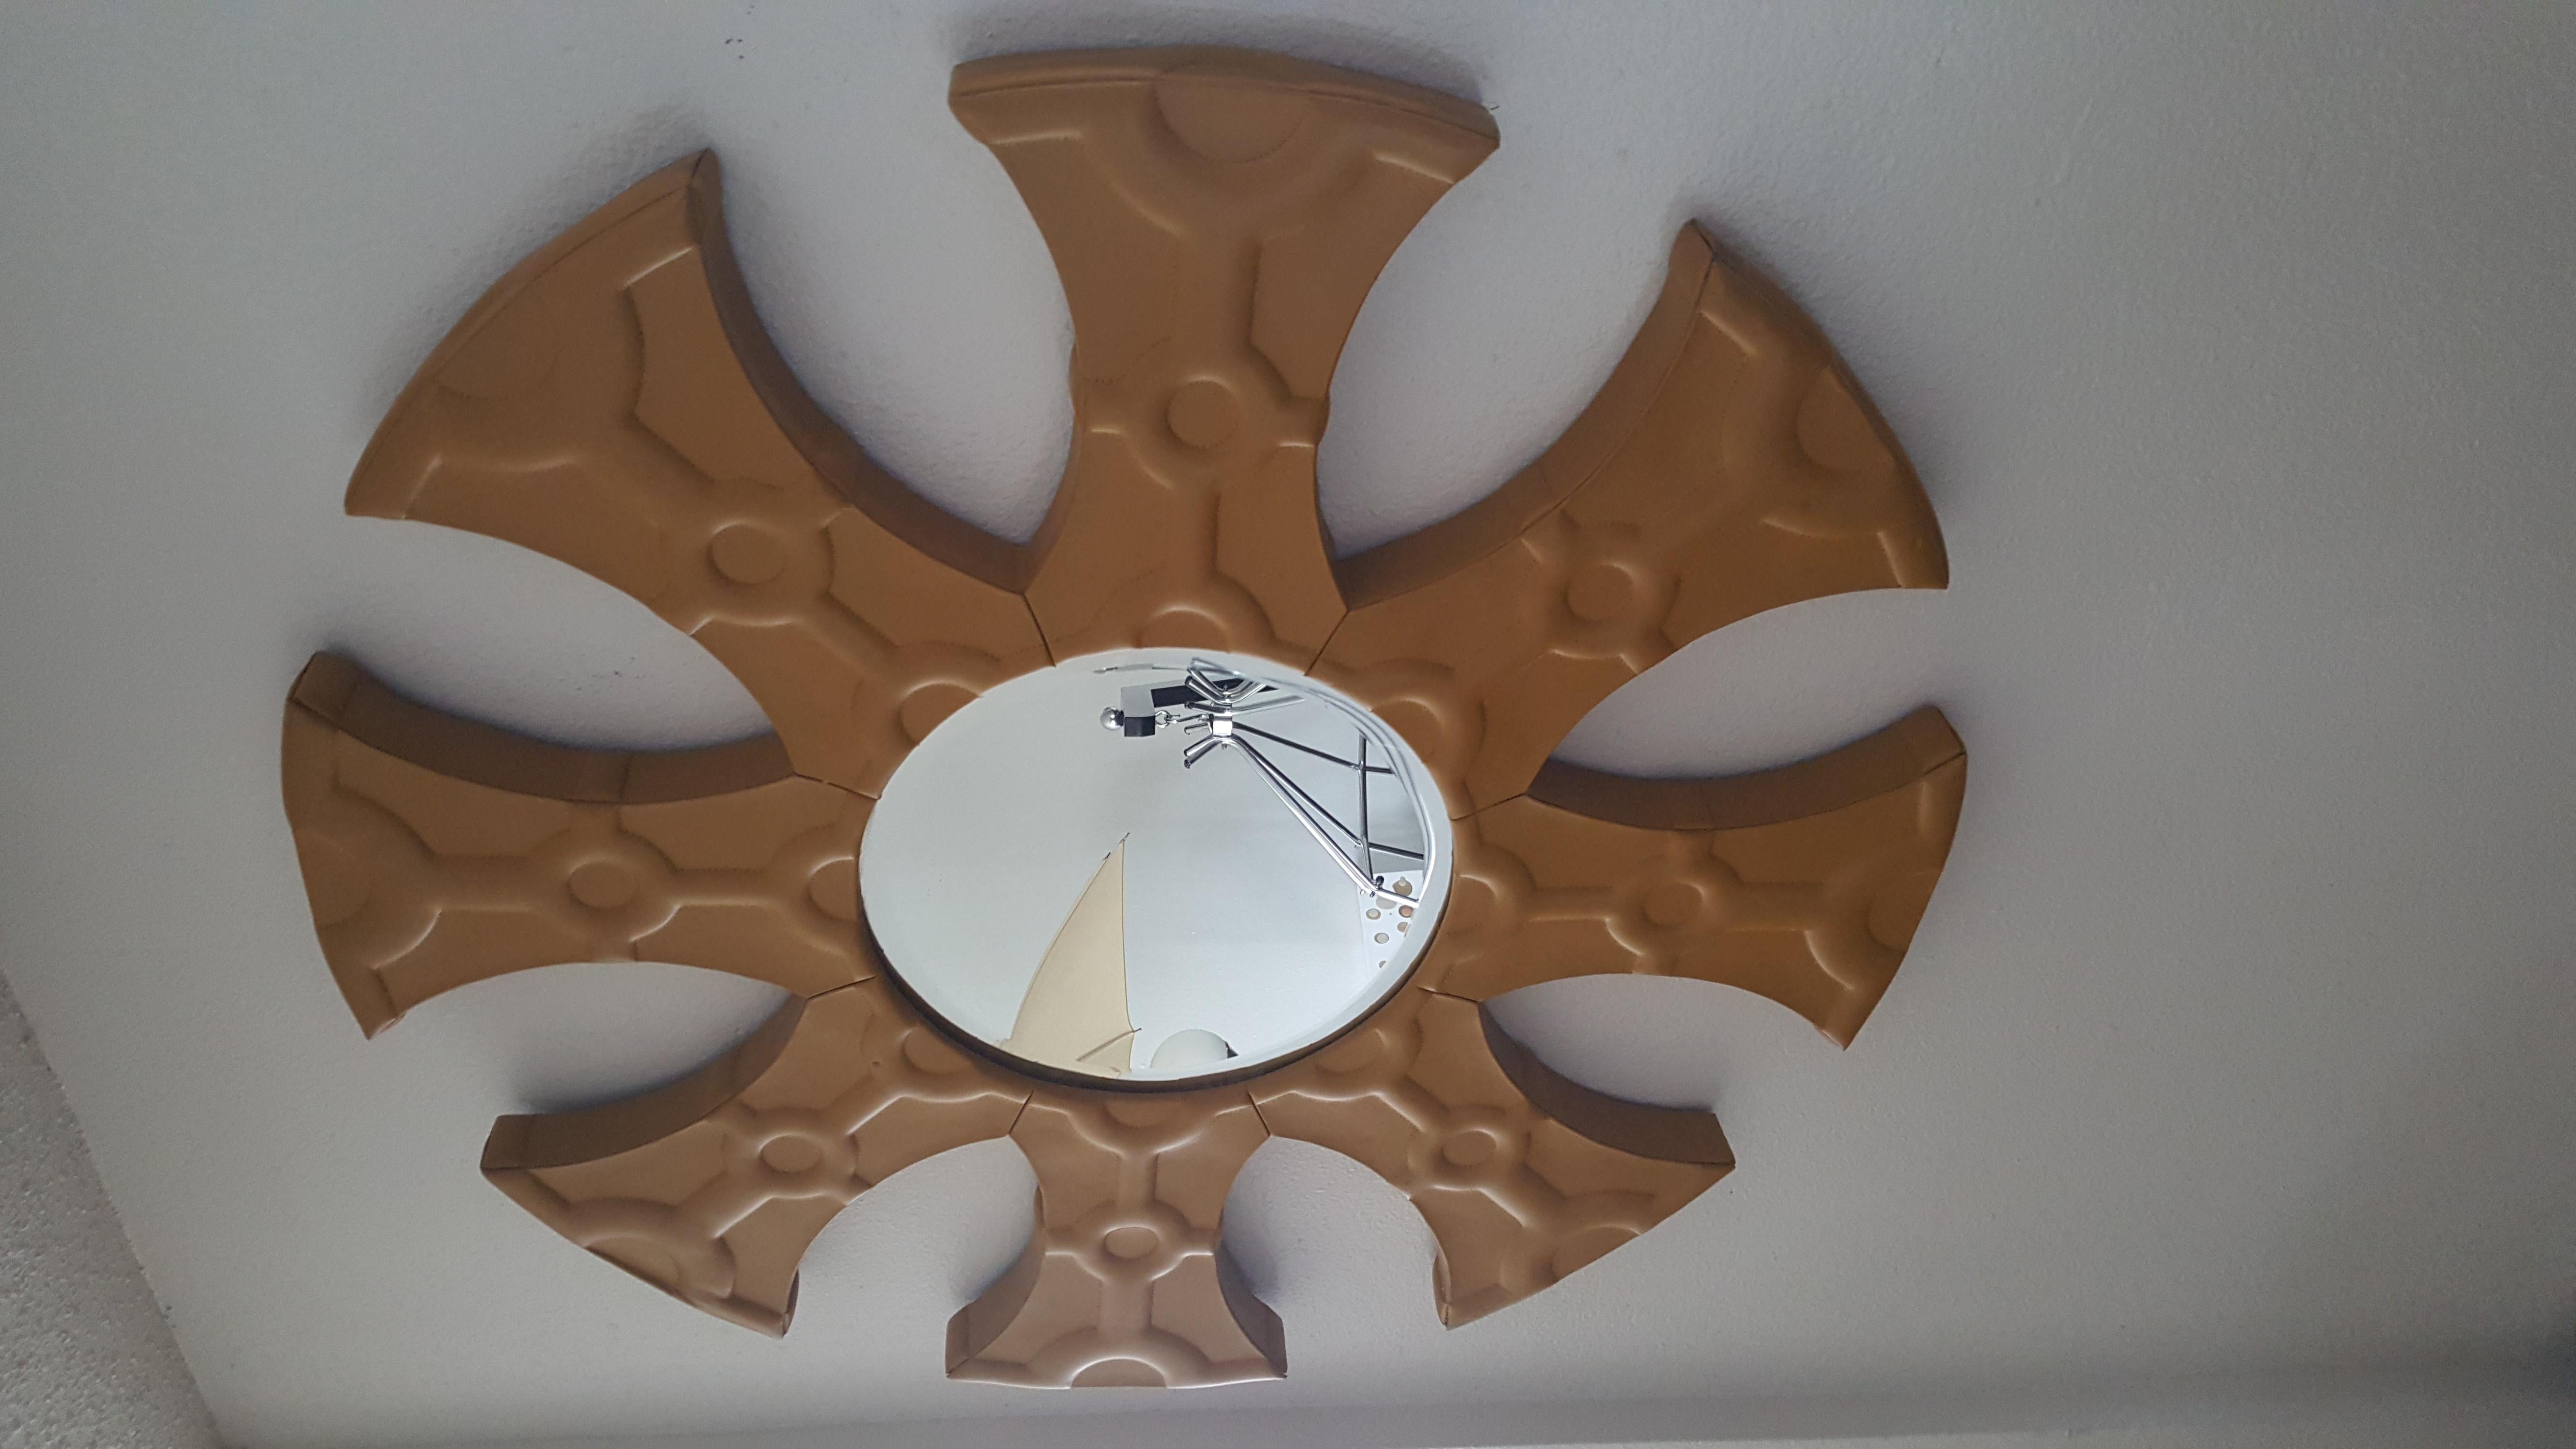 Incredible leather wall hanging mirror with great abstract designs which gives a wall a very creative look.